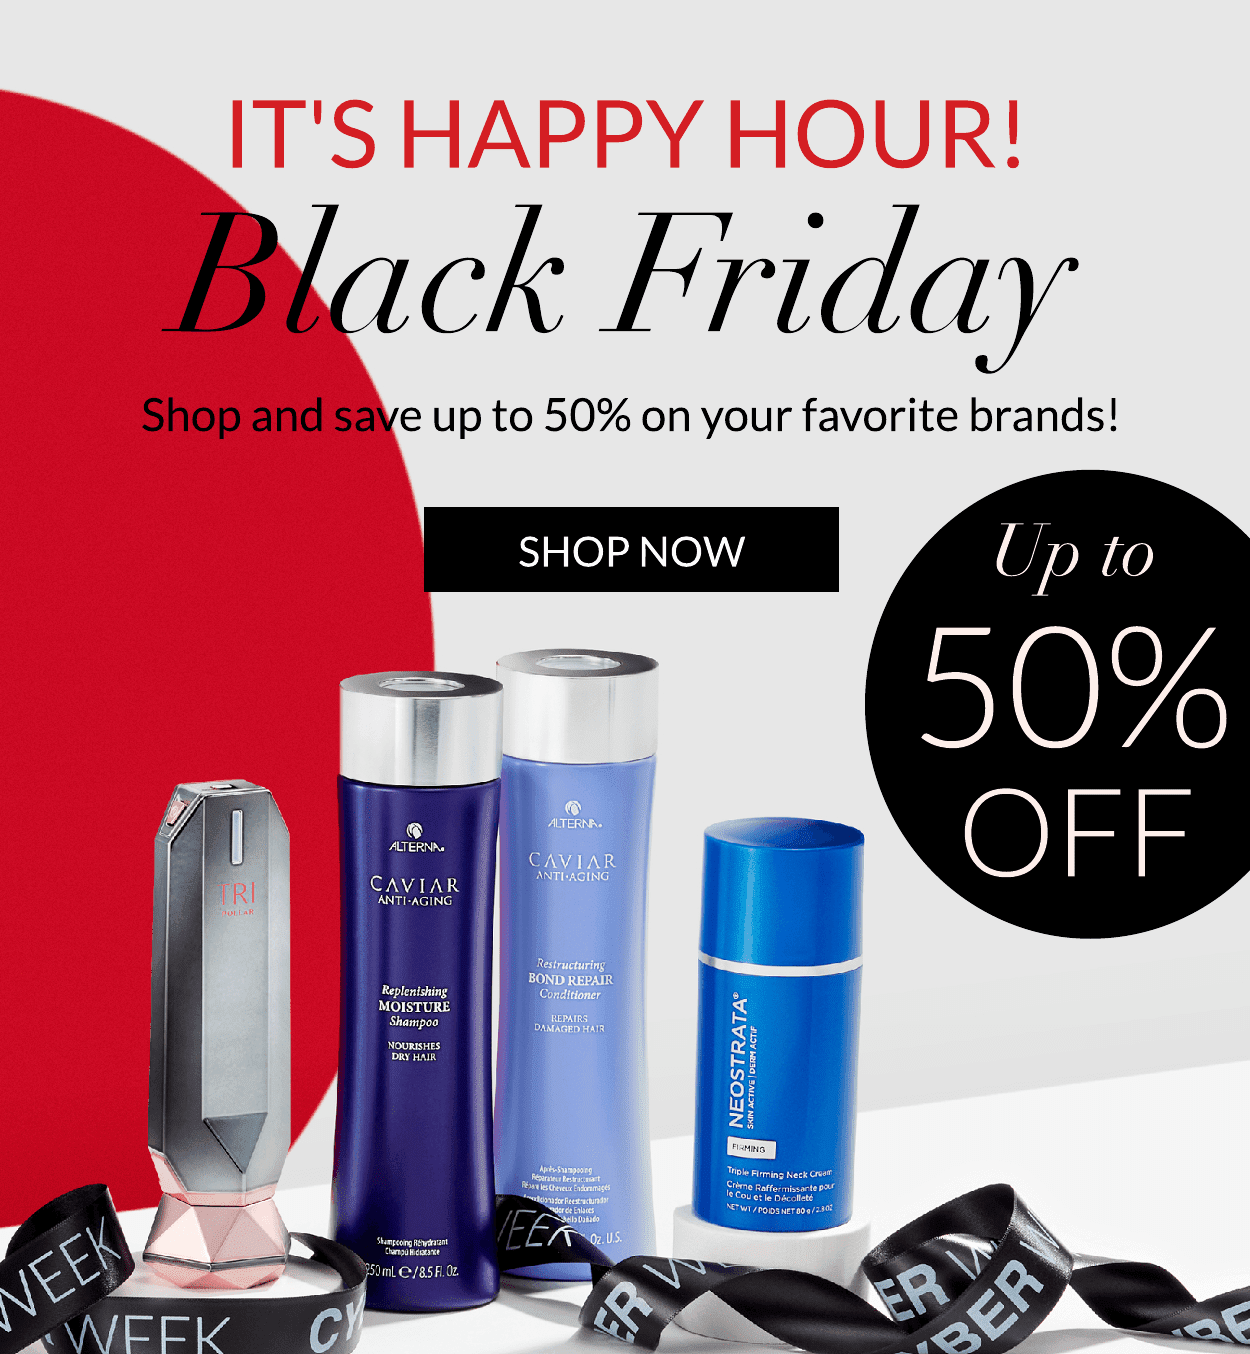 Black Friday at Skinstore: Up to 50% off